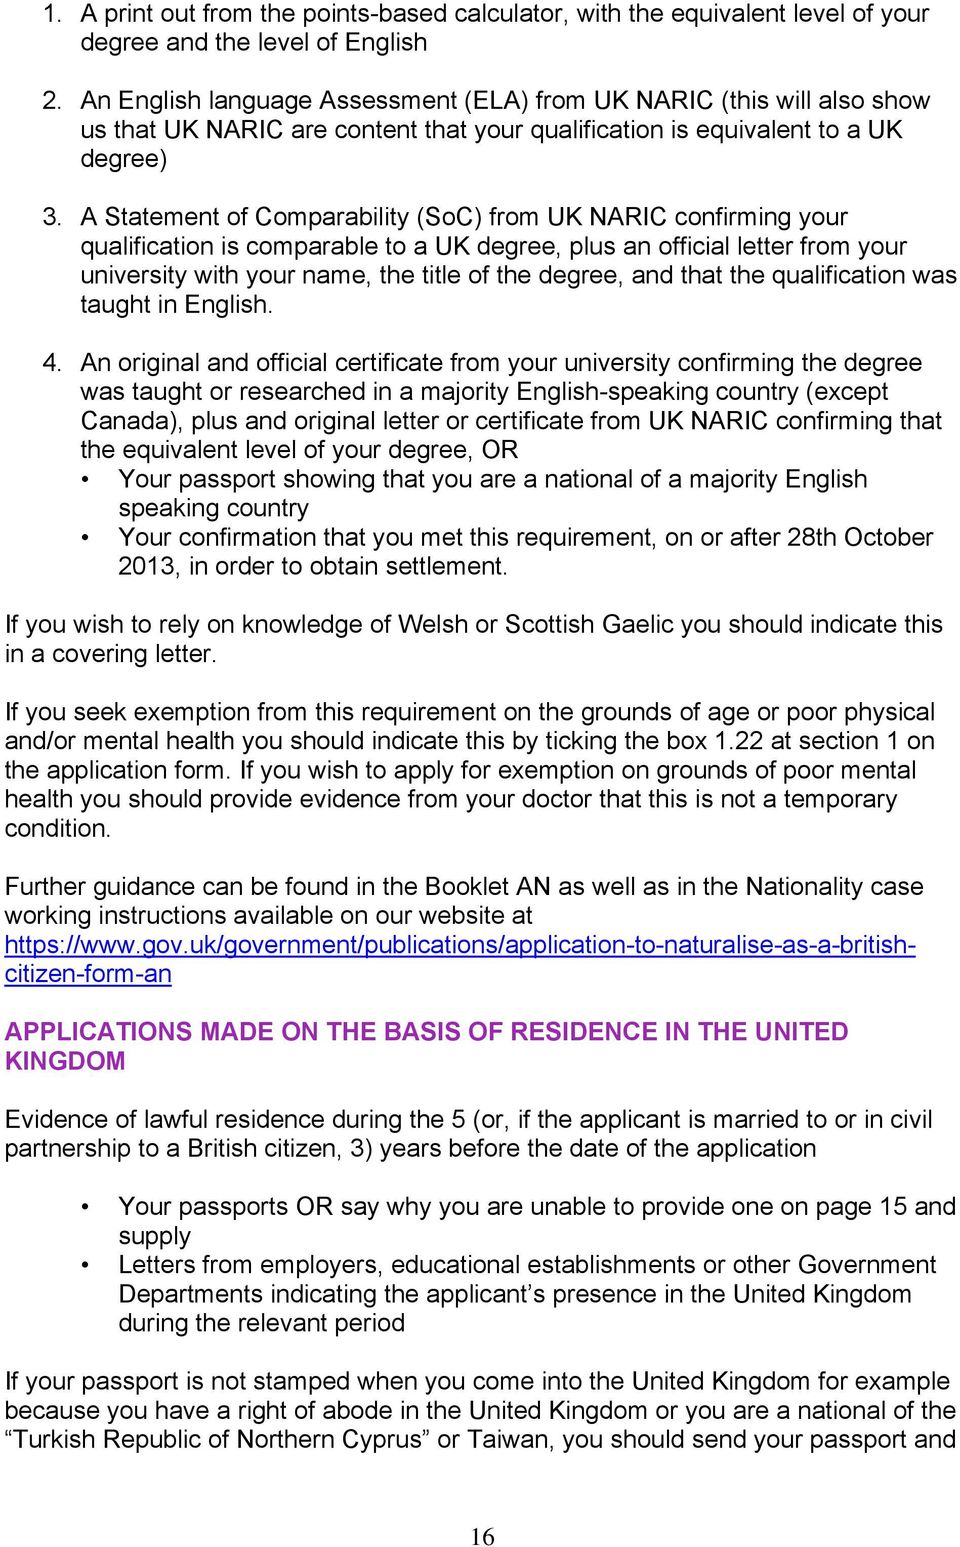 A Statement of Comparability (SoC) from UK NARIC confirming your qualification is comparable to a UK degree, plus an official letter from your university with your name, the title of the degree, and